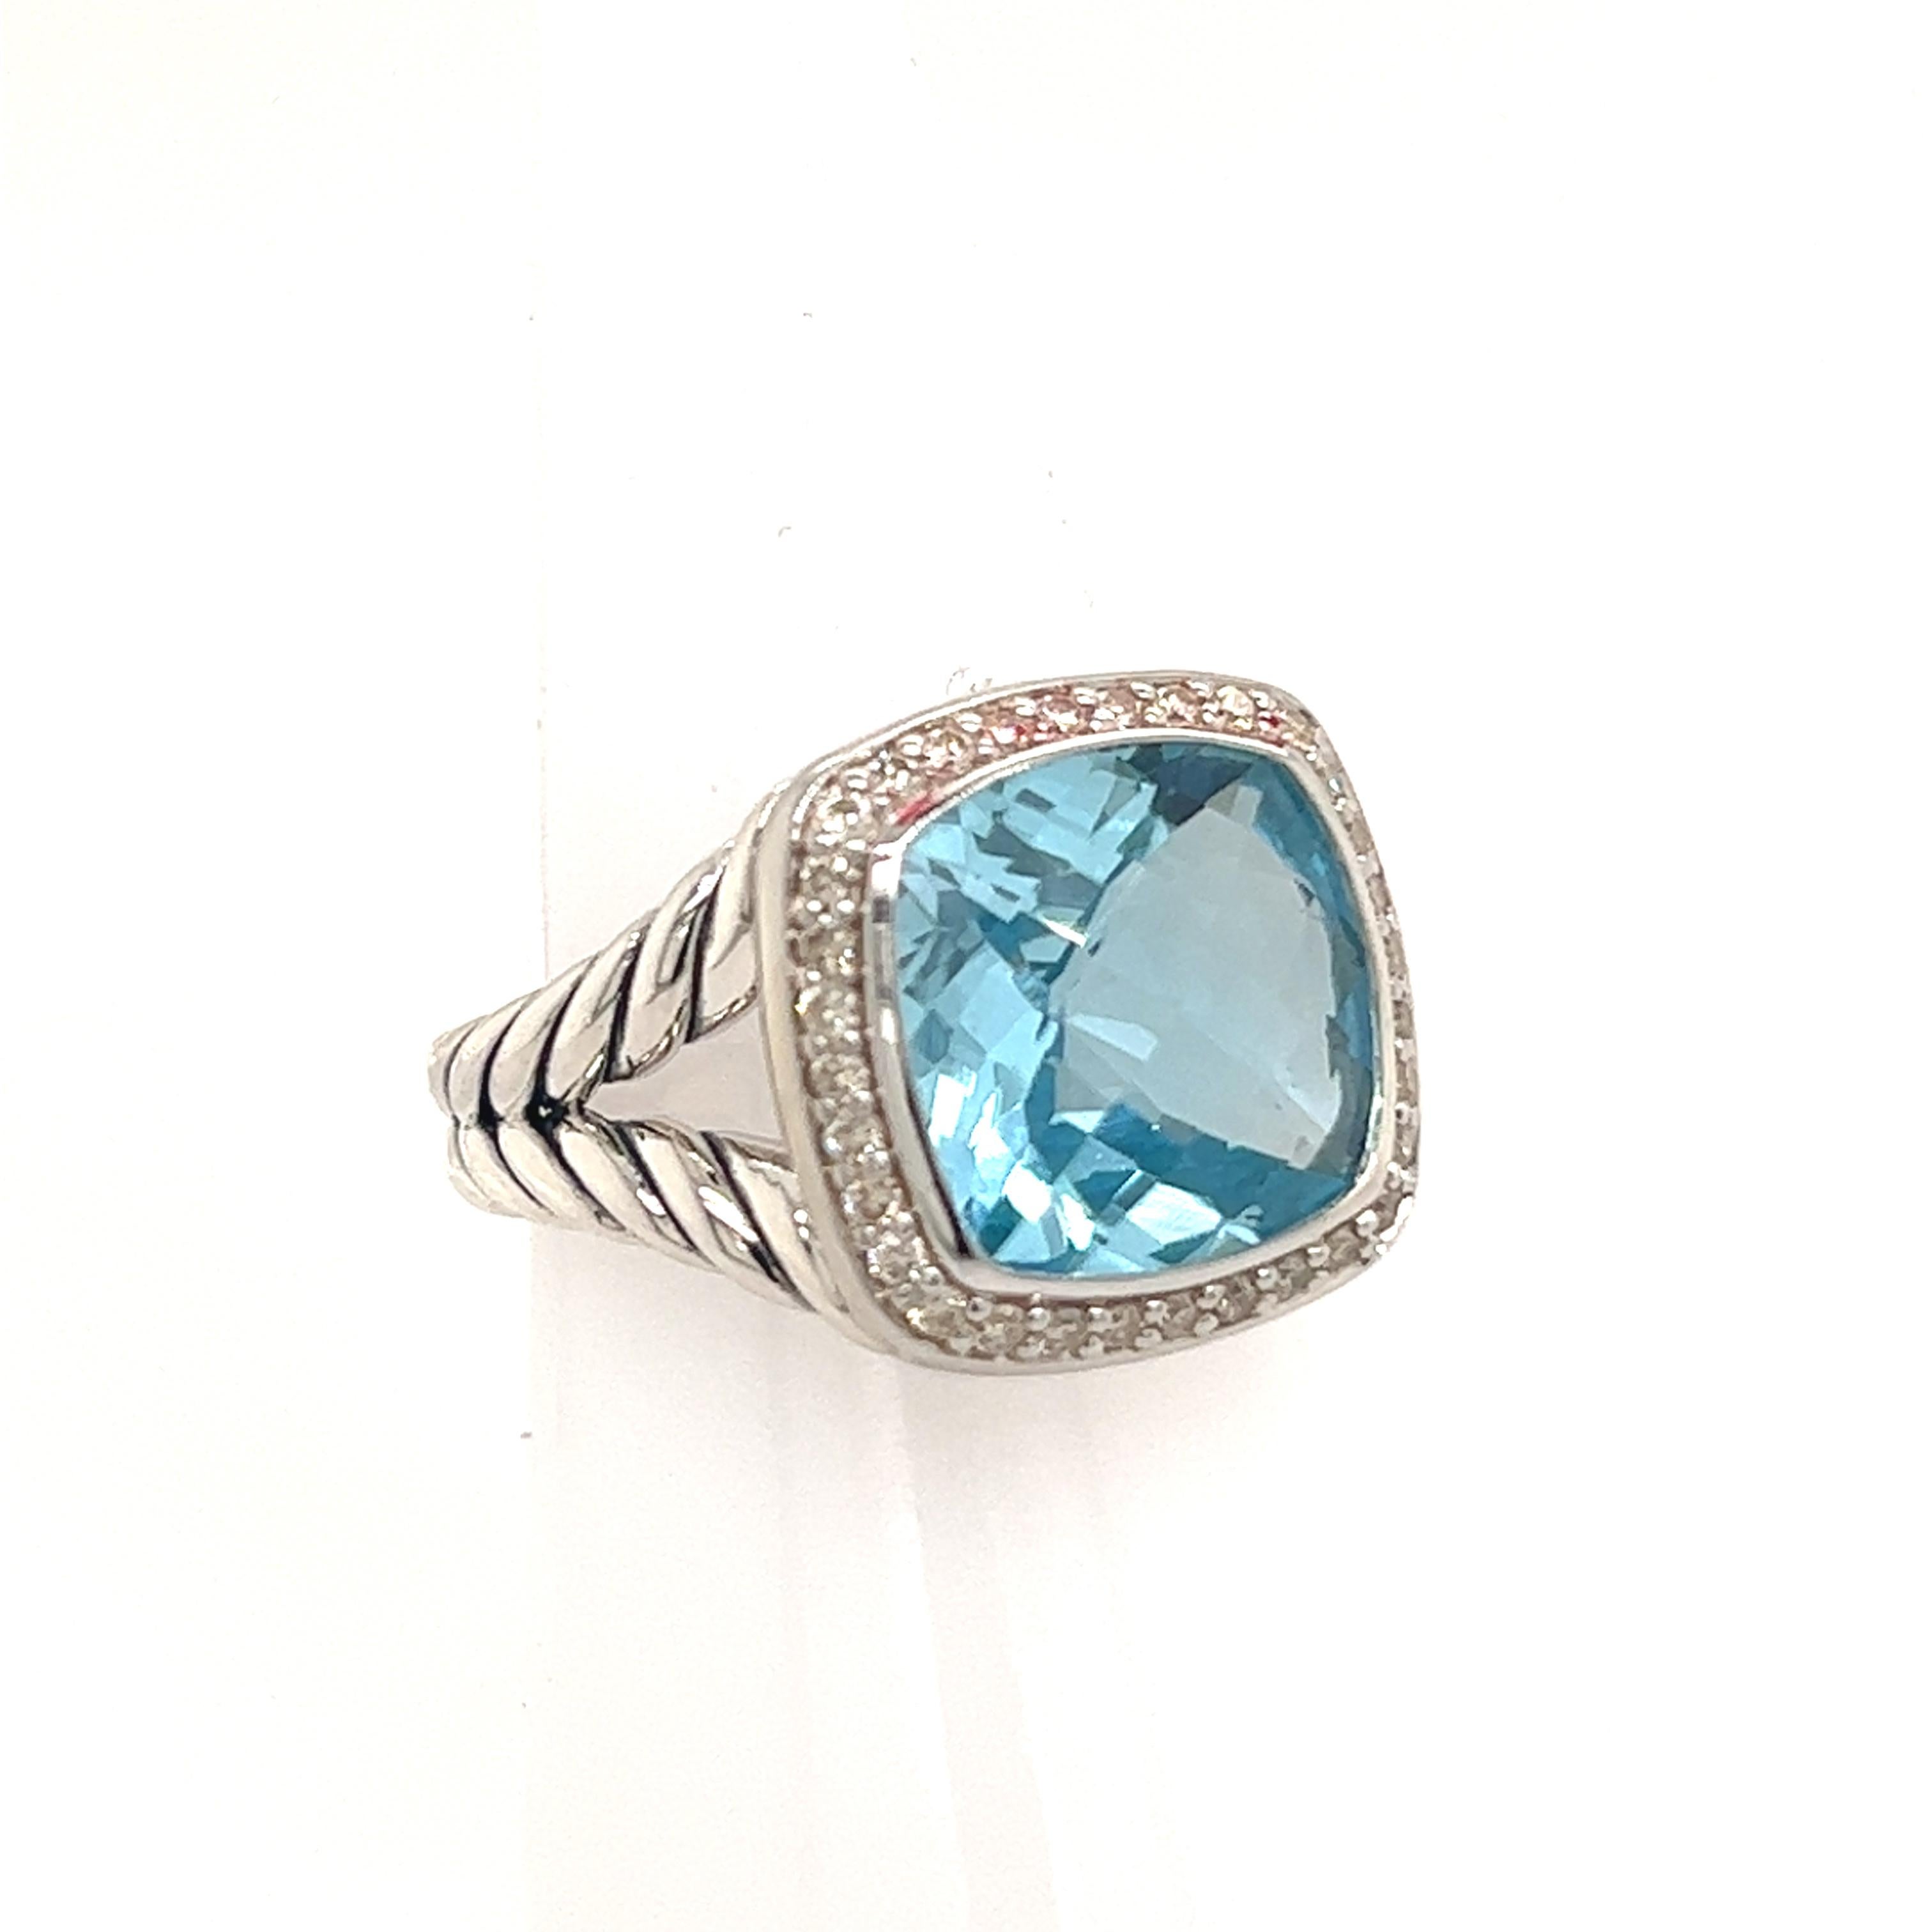 David Yurman Estate Blue Topaz Diamond Albion Ring Size 9 Sterling Silver 6.28 TCW DY93

Ring from ALBION COLLECTION

This elegant Authentic David Yurman ring is made of sterling silver and has a weight of 9.63 grams.

TRUSTED SELLER SINCE